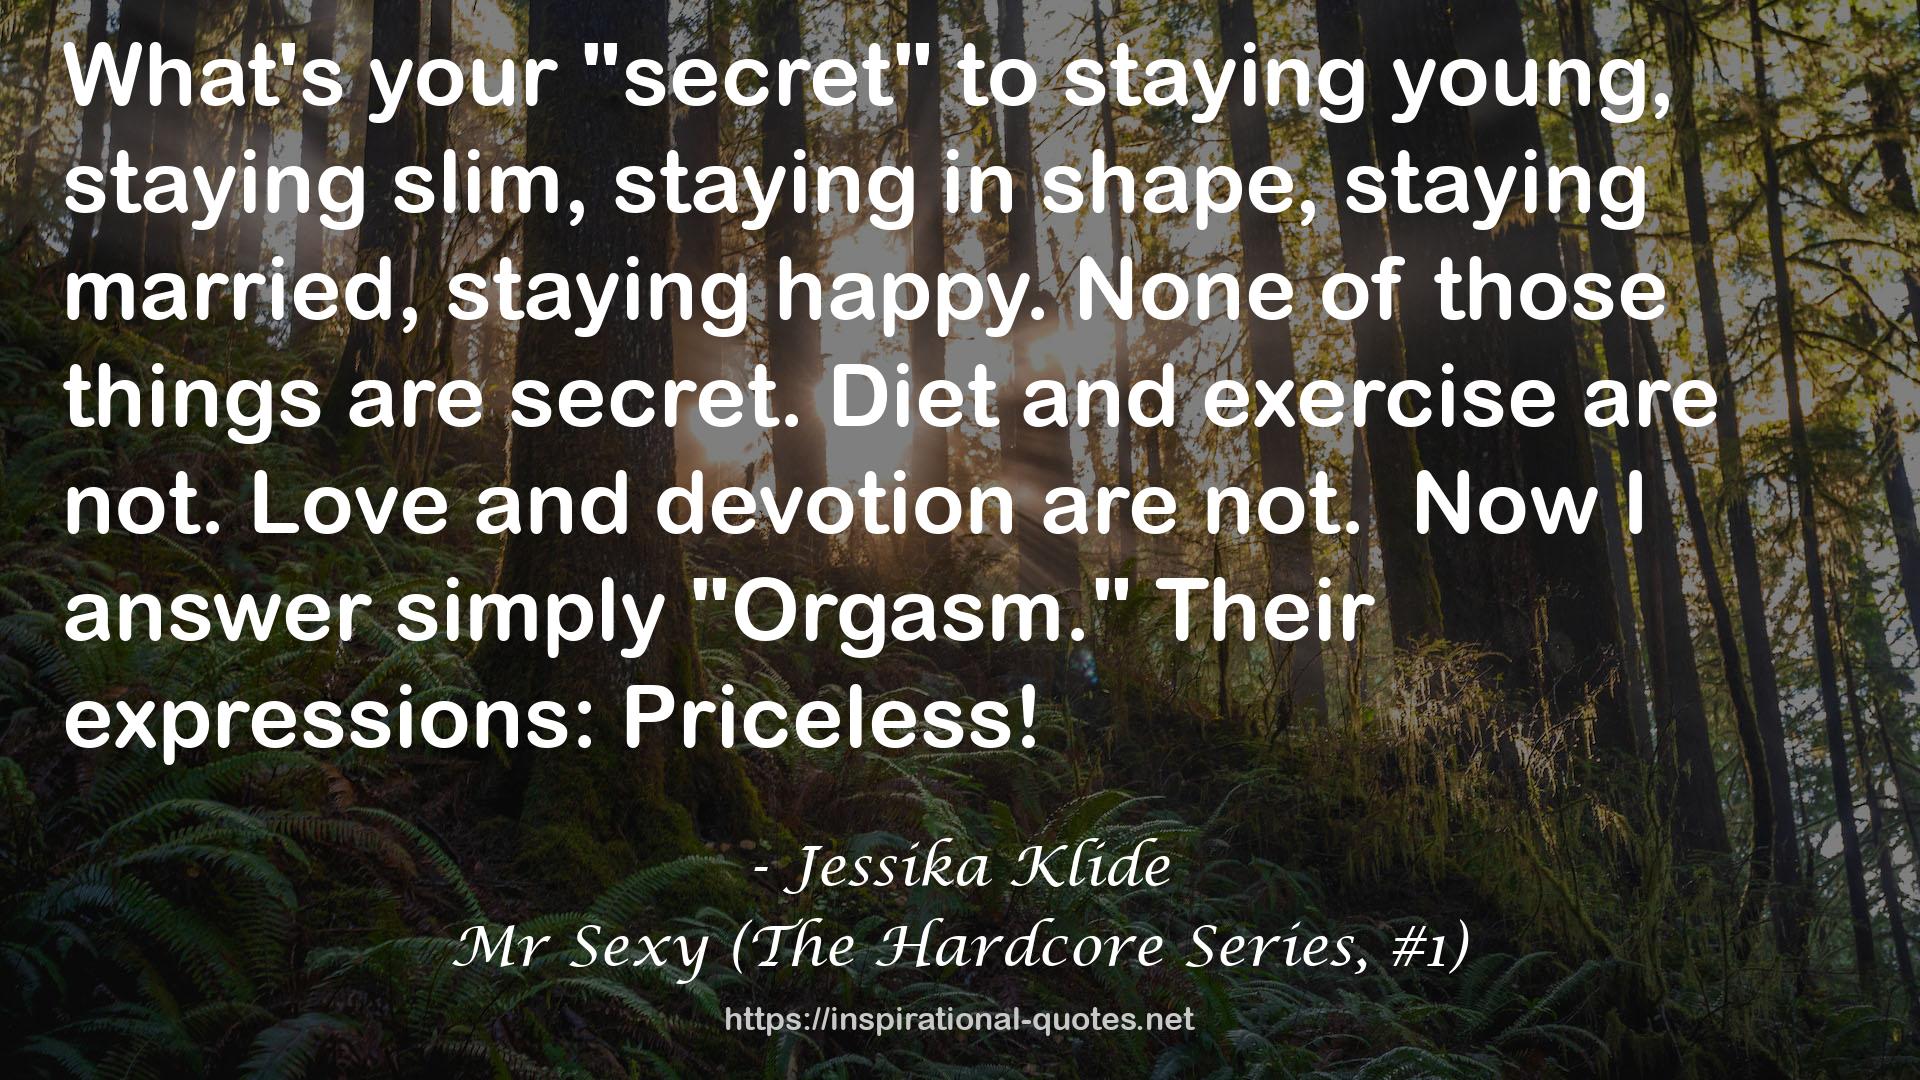 Mr Sexy (The Hardcore Series, #1) QUOTES